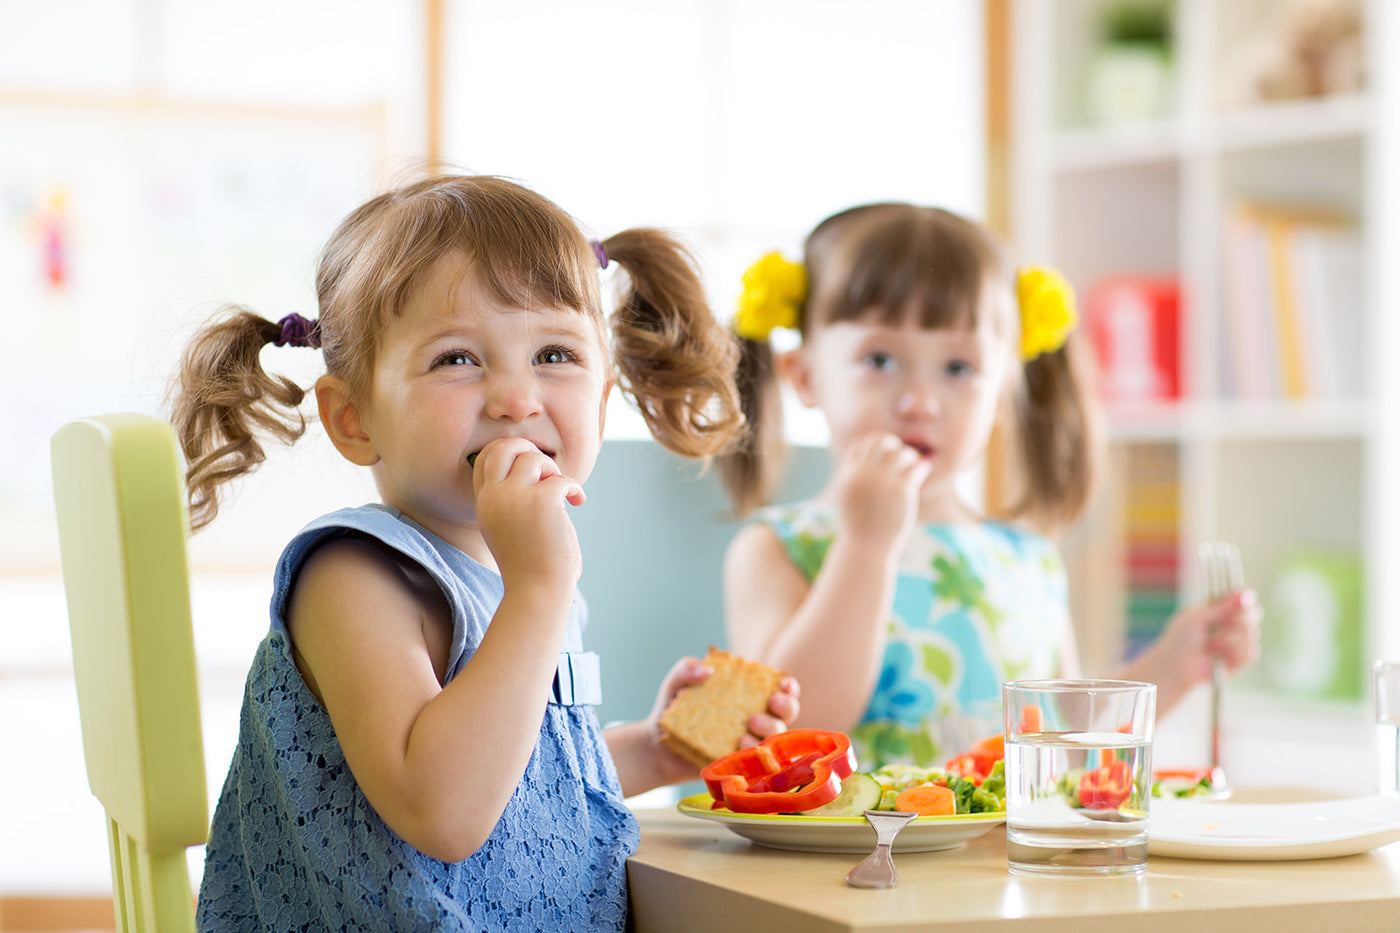 10 ways to get your kids to eat more veggies